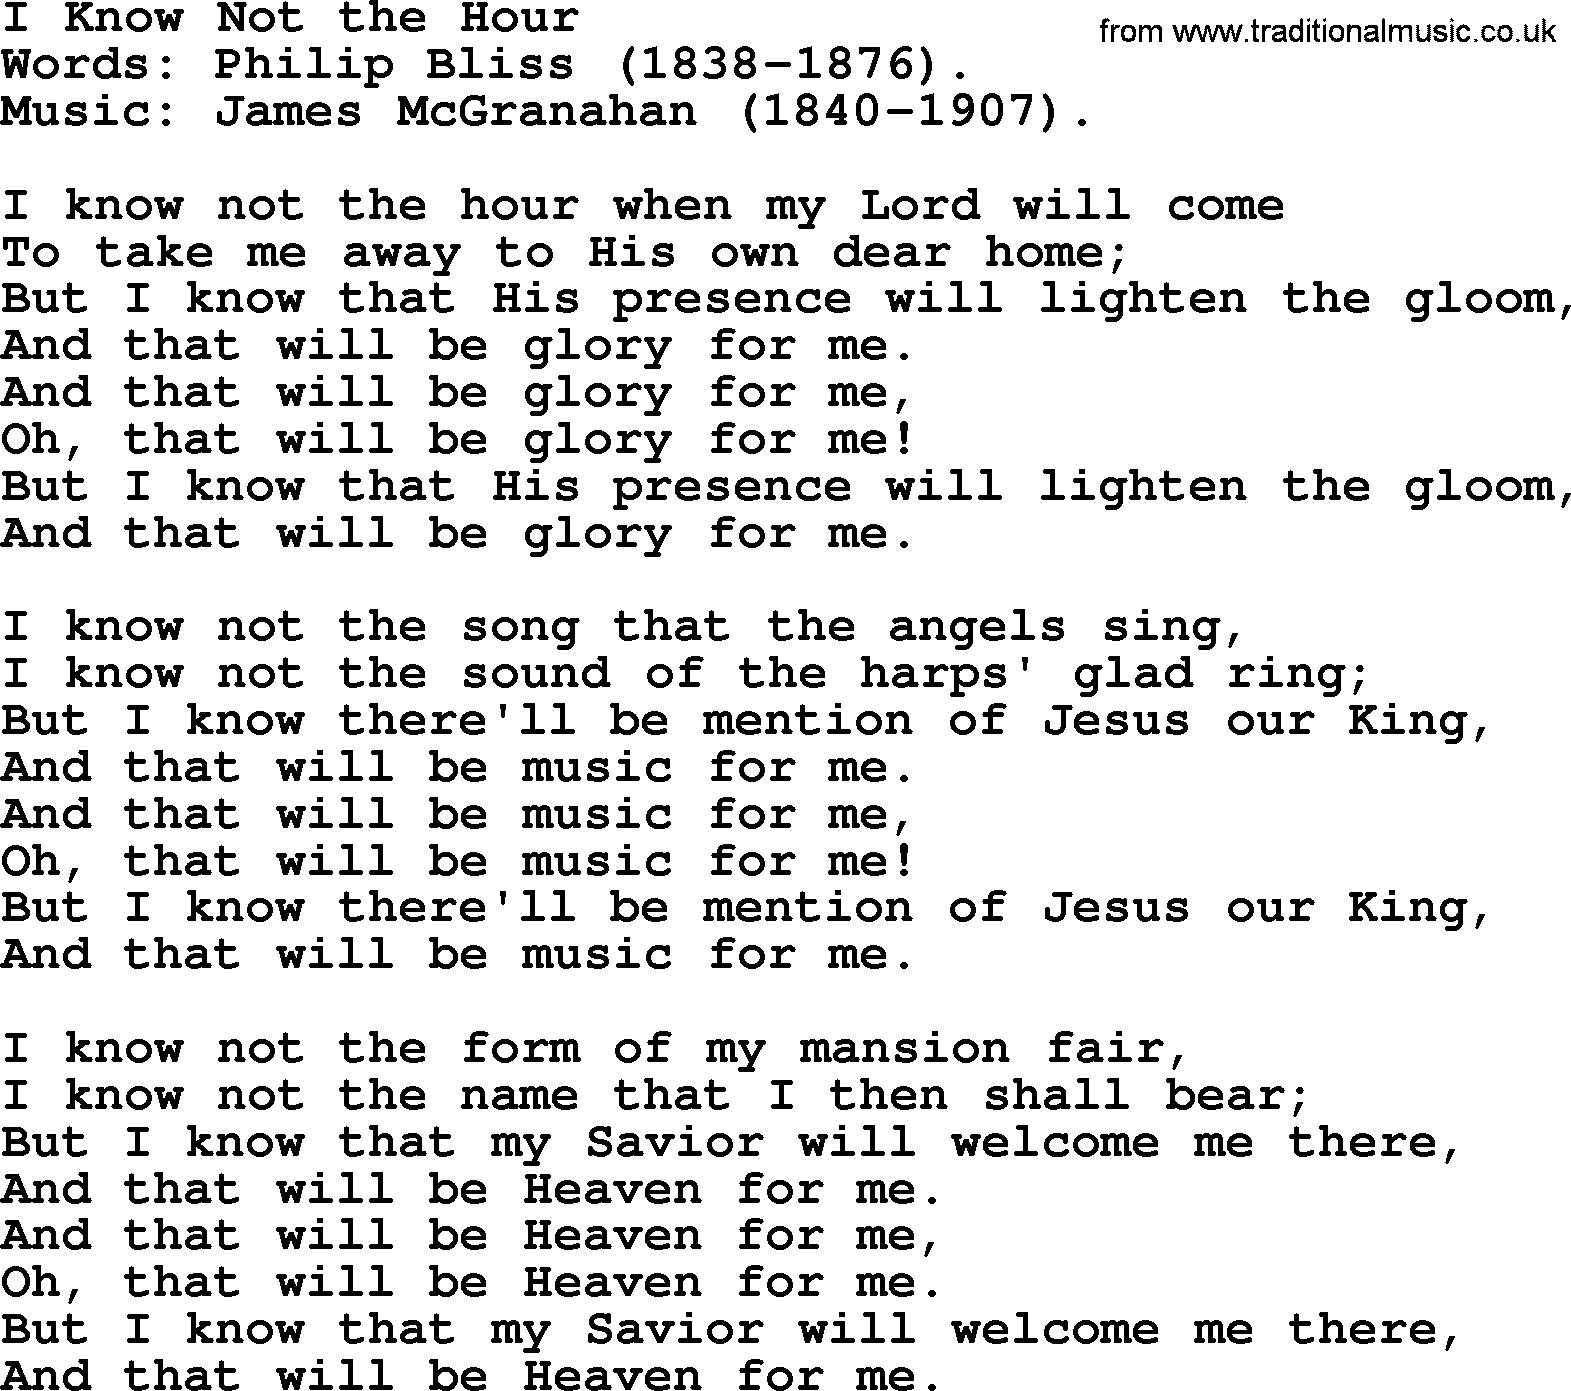 Philip Bliss Song: I Know Not The Hour, lyrics